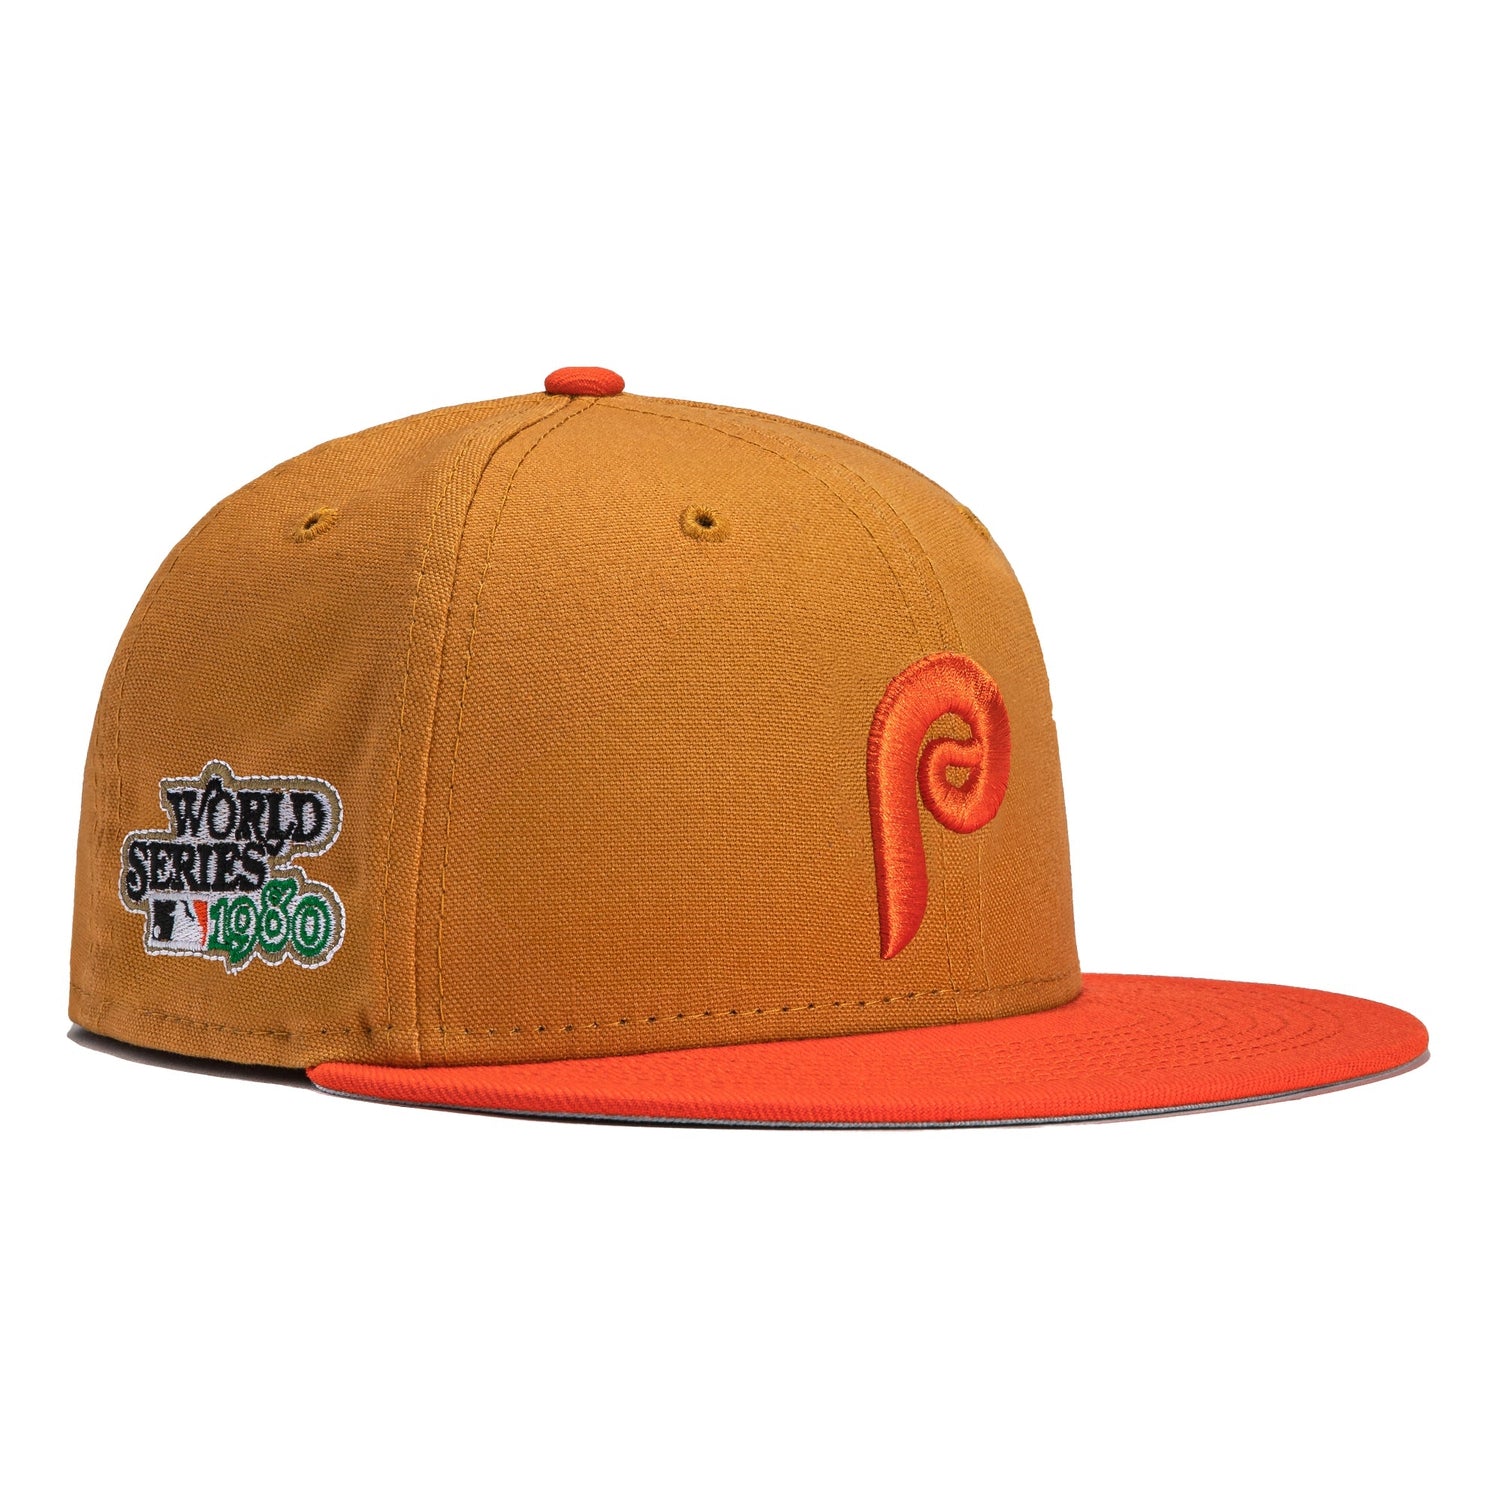 New Era Philadelphia Phillies World Series 1980 Powder Blues Sky Throwback  Two Tone Edition 59Fifty Fitted Hat, FITTED HATS, CAPS